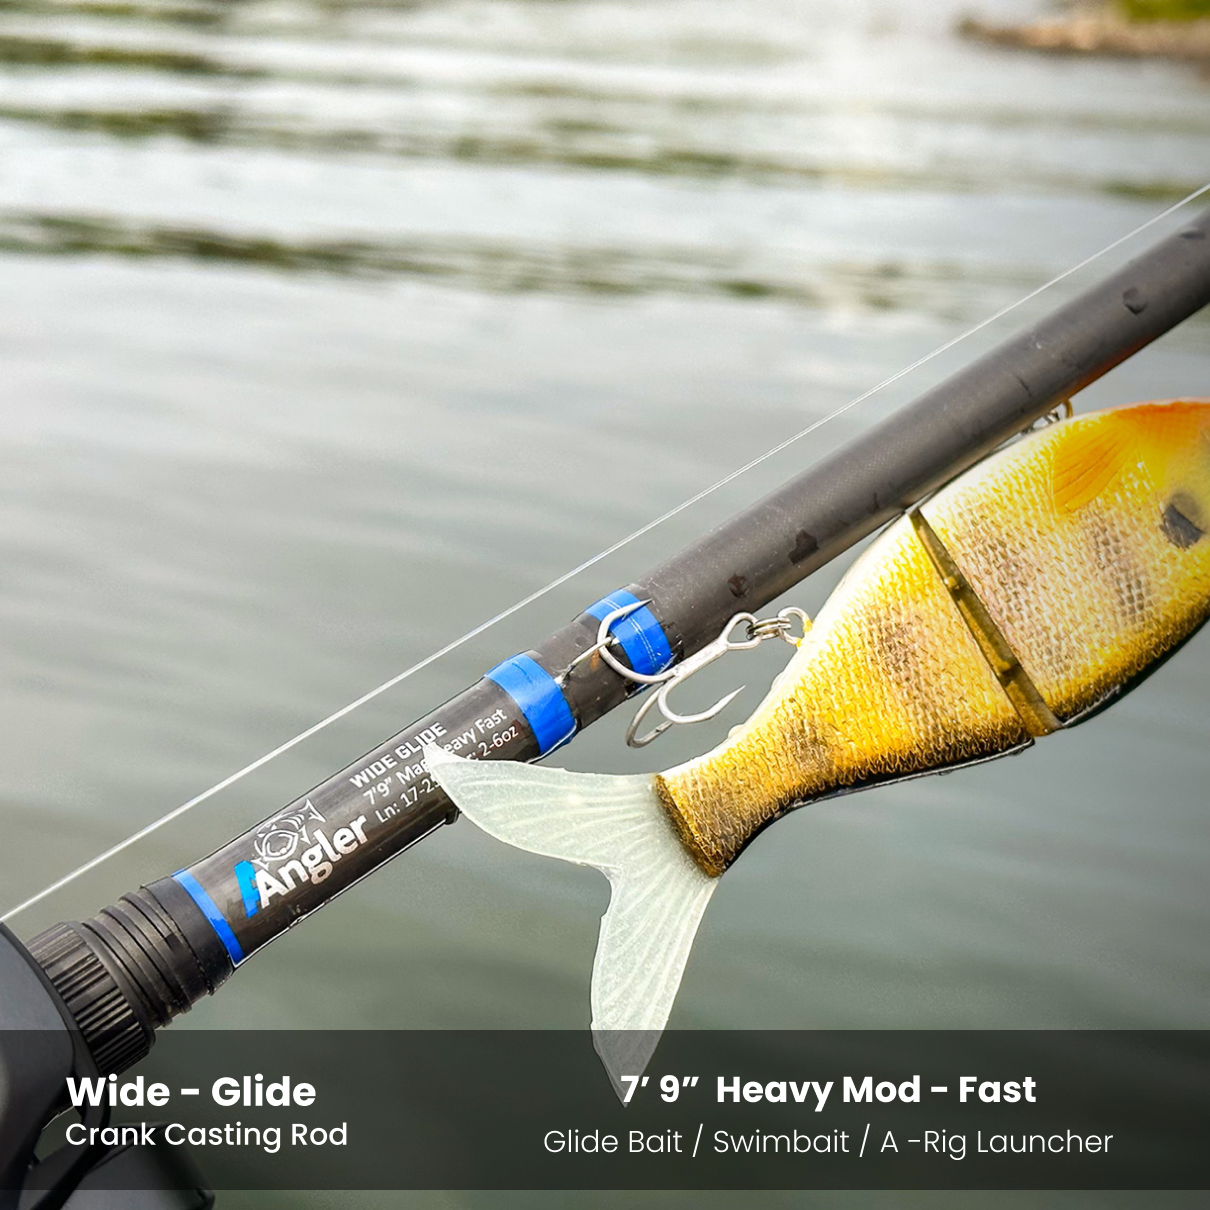 Proven Glide Bait Gear for Trophy Bass Fishing - Wired2Fish